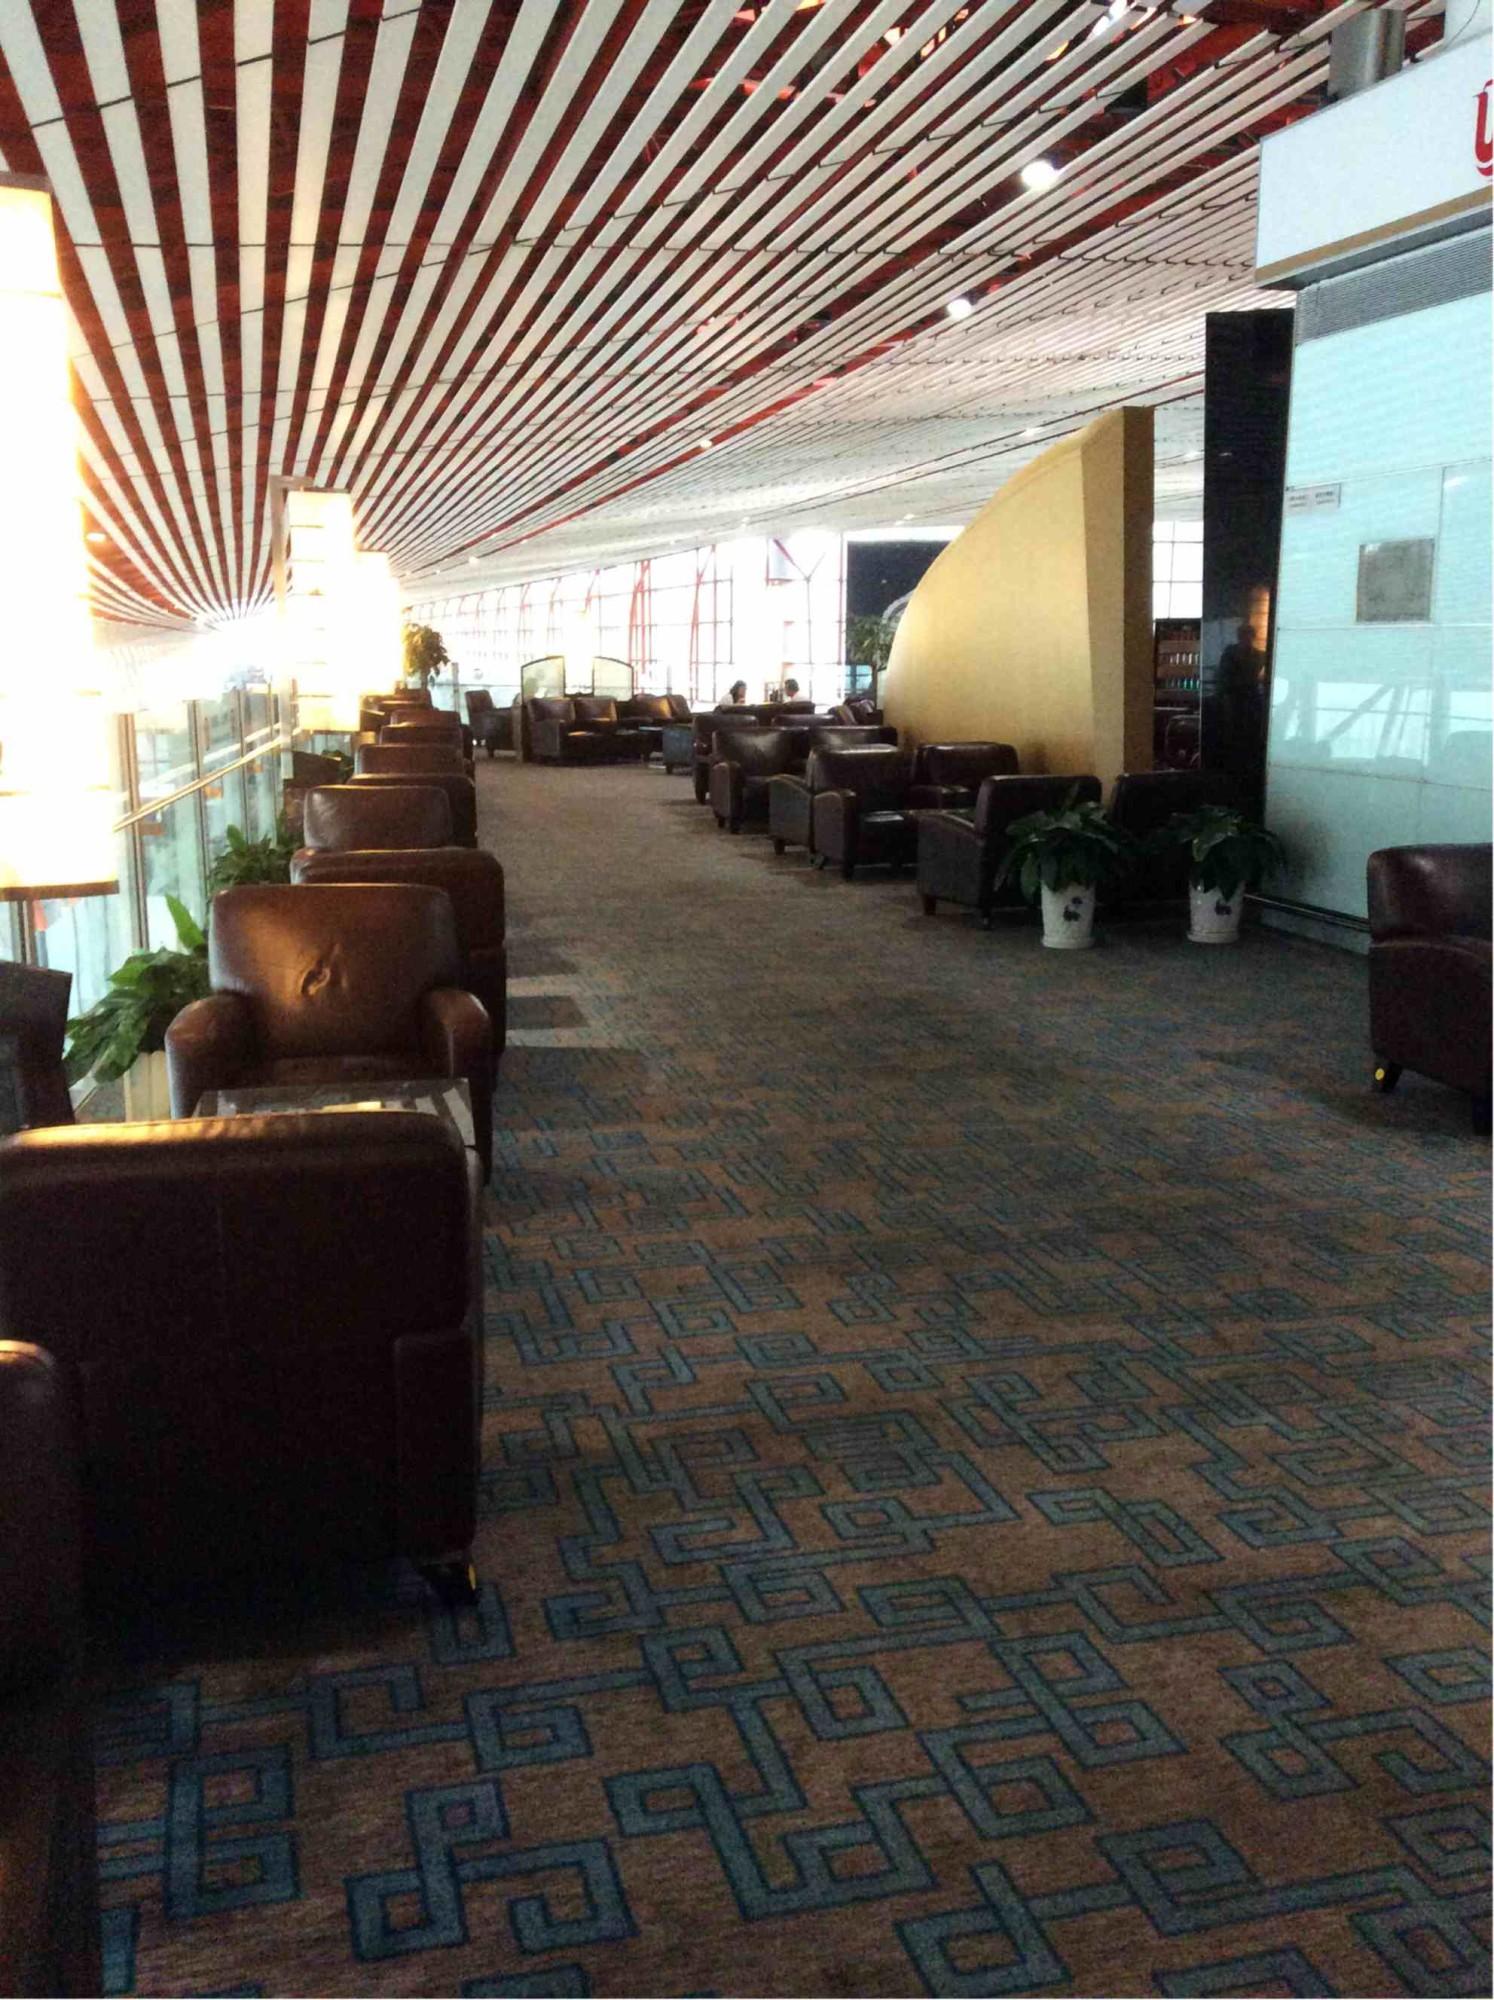 Air China Domestic Business Class Lounge image 1 of 6